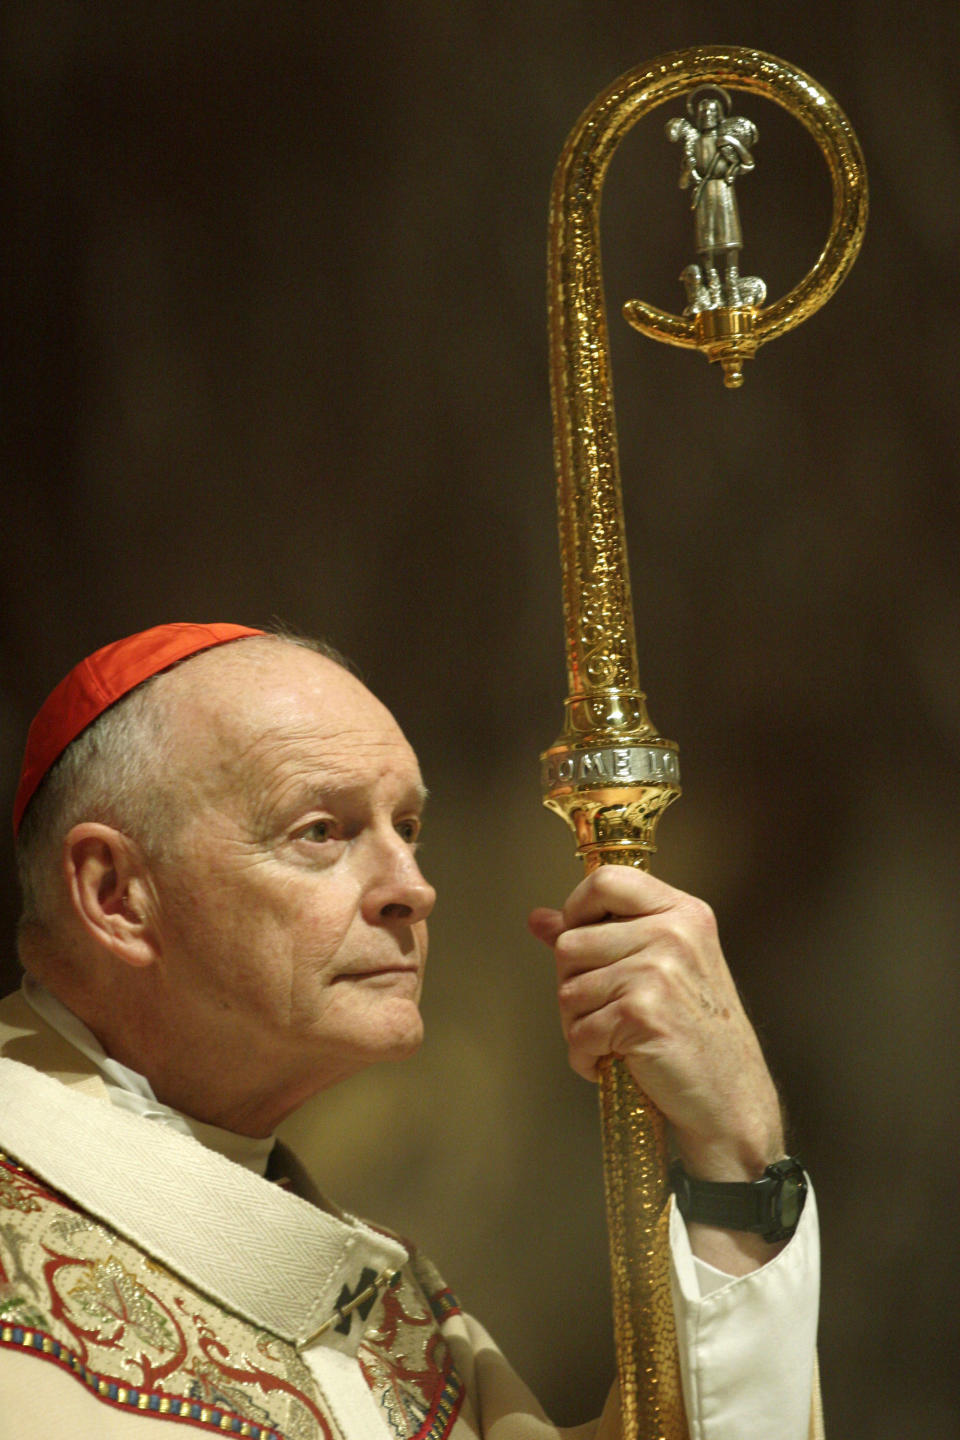 Cardinal Theodore McCarrick, Archbishop of Washington, listens to a reading at the Cathedral of St. Matthew on March 24, 2005 in Washington, D.C. McCarrick also performed a foot-washing as part of Holy Week celebrations. | Chip Somodevilla—Getty Images